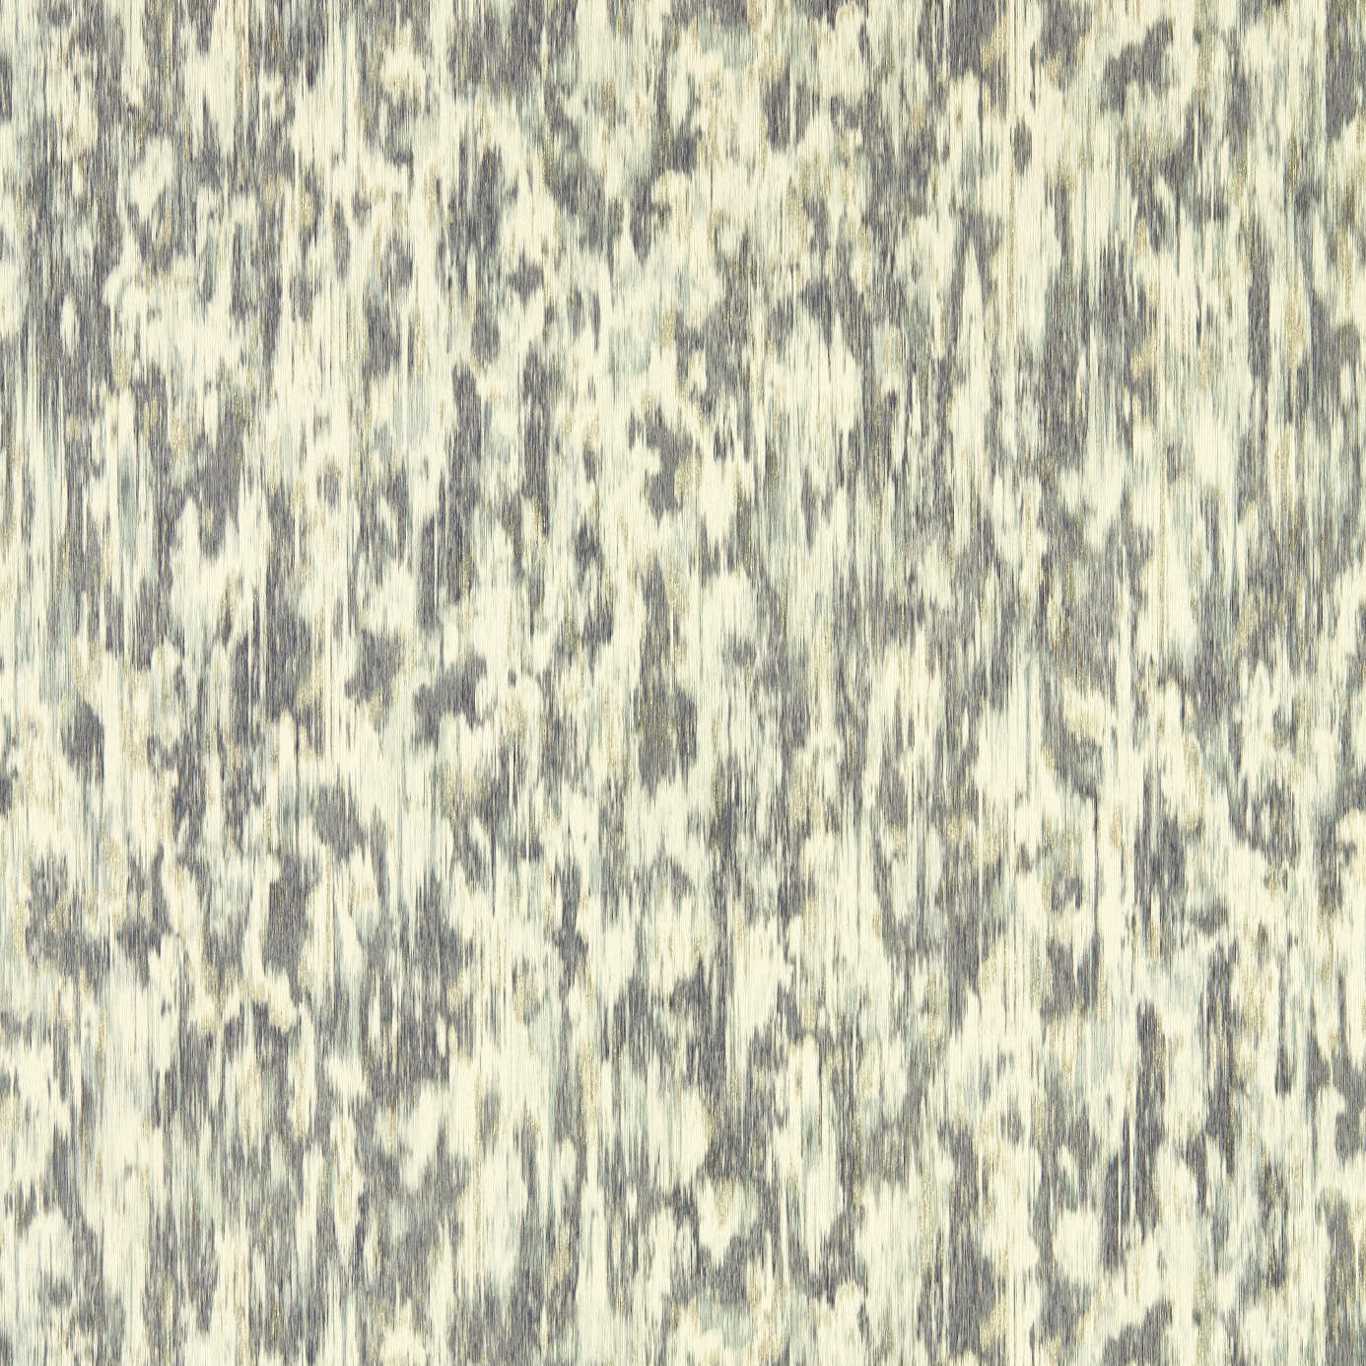 Fade Slate/Pearl Wallpaper HM7W112743 by Harlequin